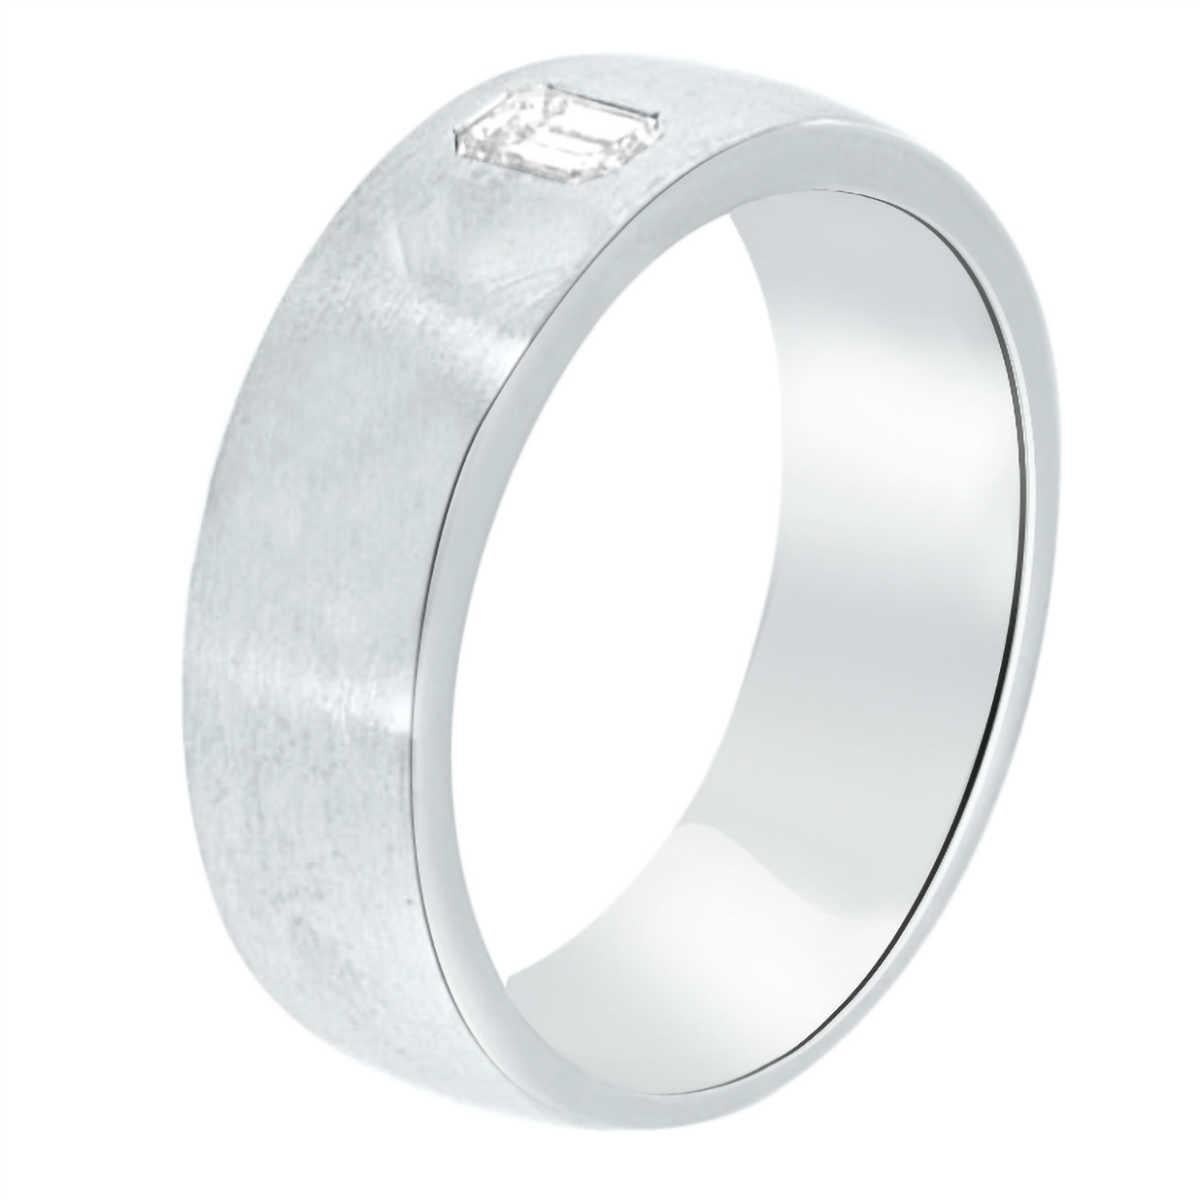 This 18k white gold handcrafted Men's band showcases a single Emerald Cut diamond on a six (6) MM wide tapered band. The band is in a polished finish.

Diamond Weight: 0.55 Carat
Diamond Color: G 
Diamond Clarity: Vs2
Finger size : 10